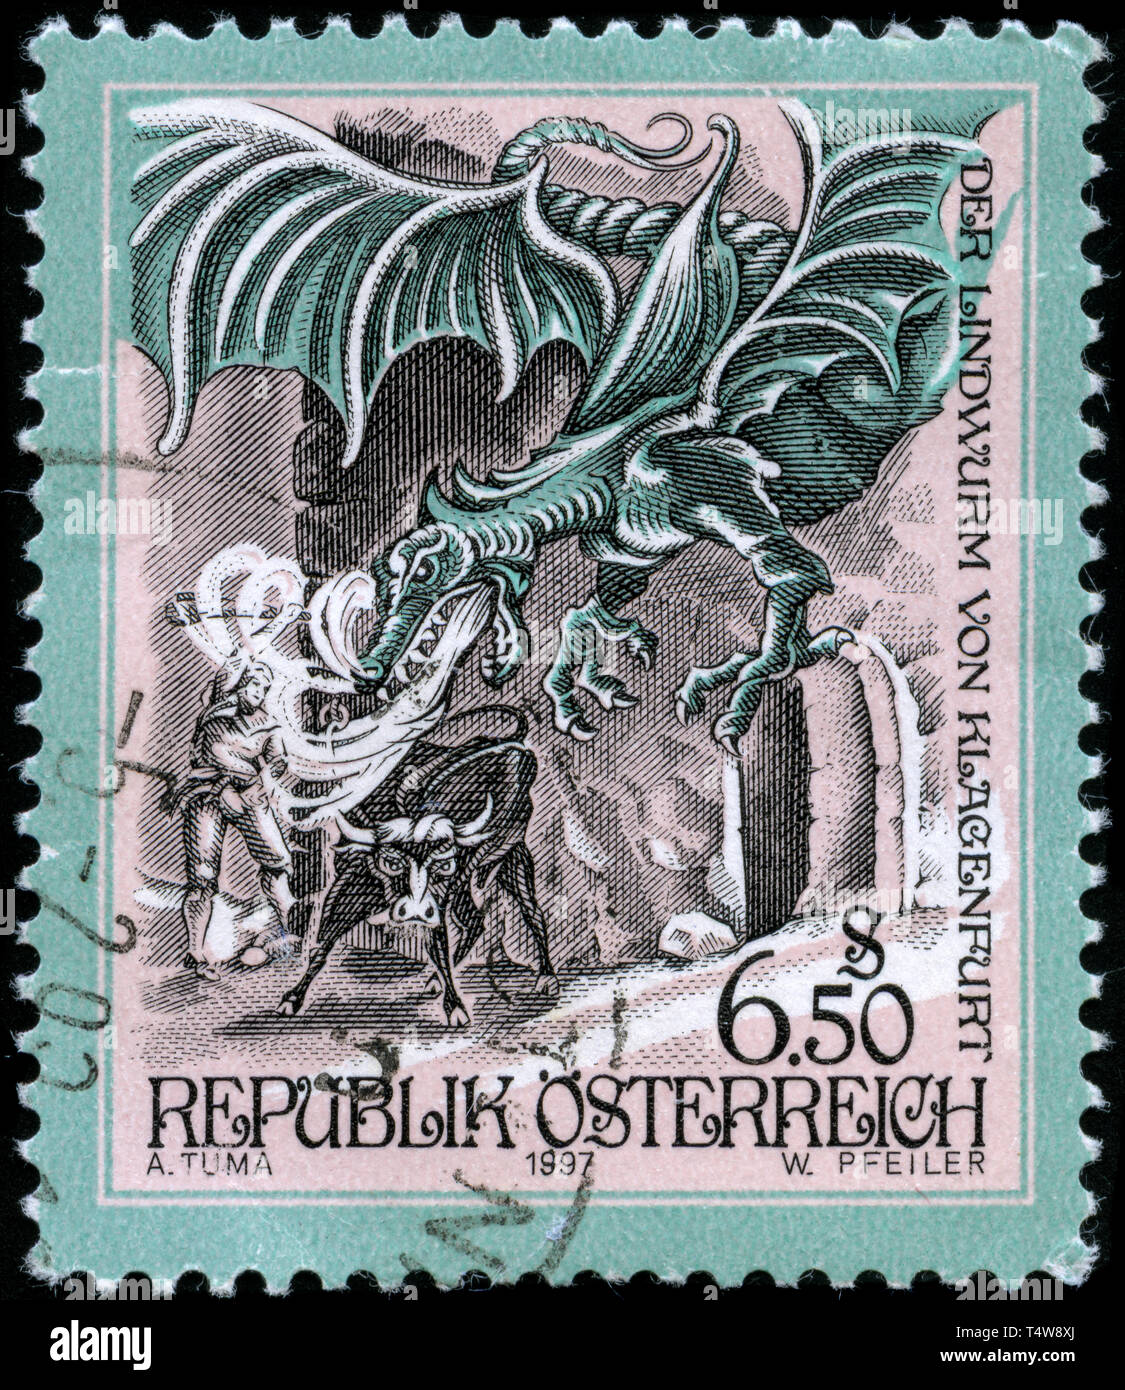 Postage stamp from Austria in the  series issued in 1997 Stock Photo